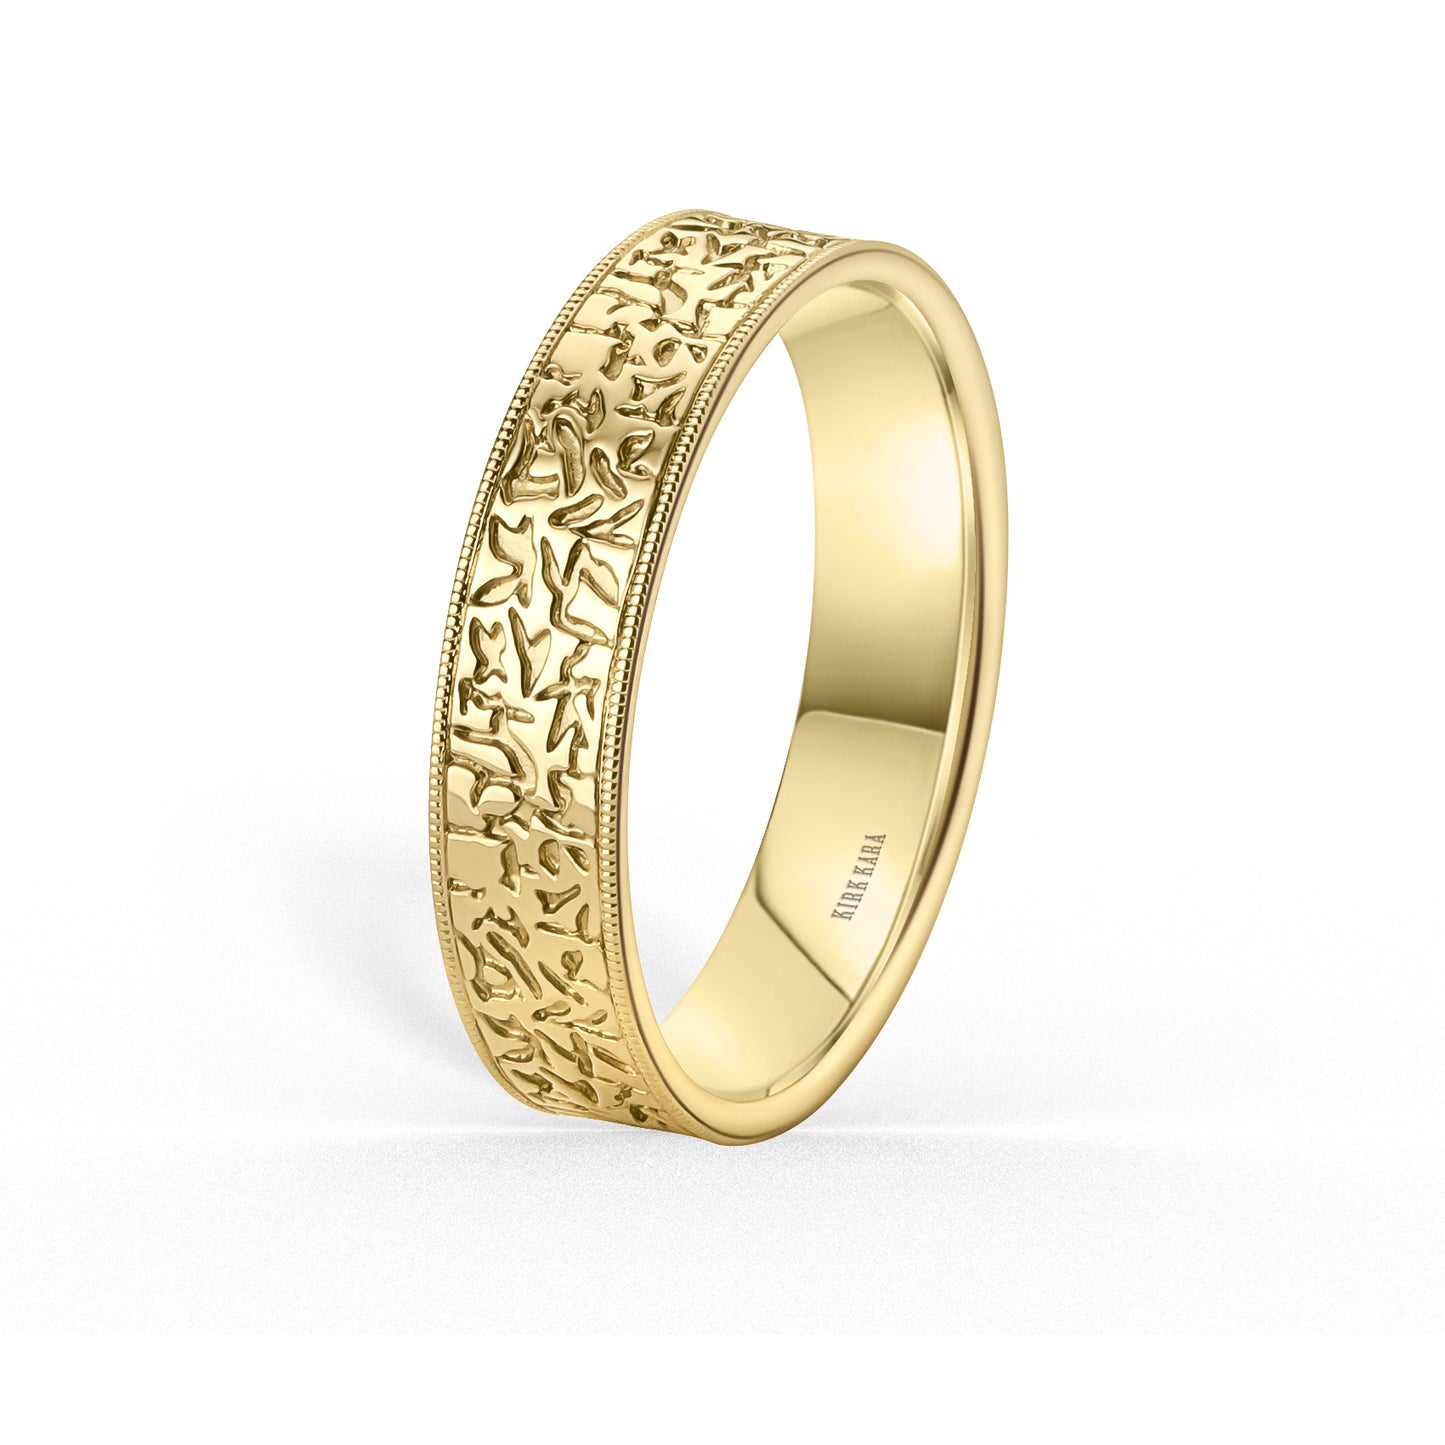 Nugget Engraved Wedding Band, 5mm